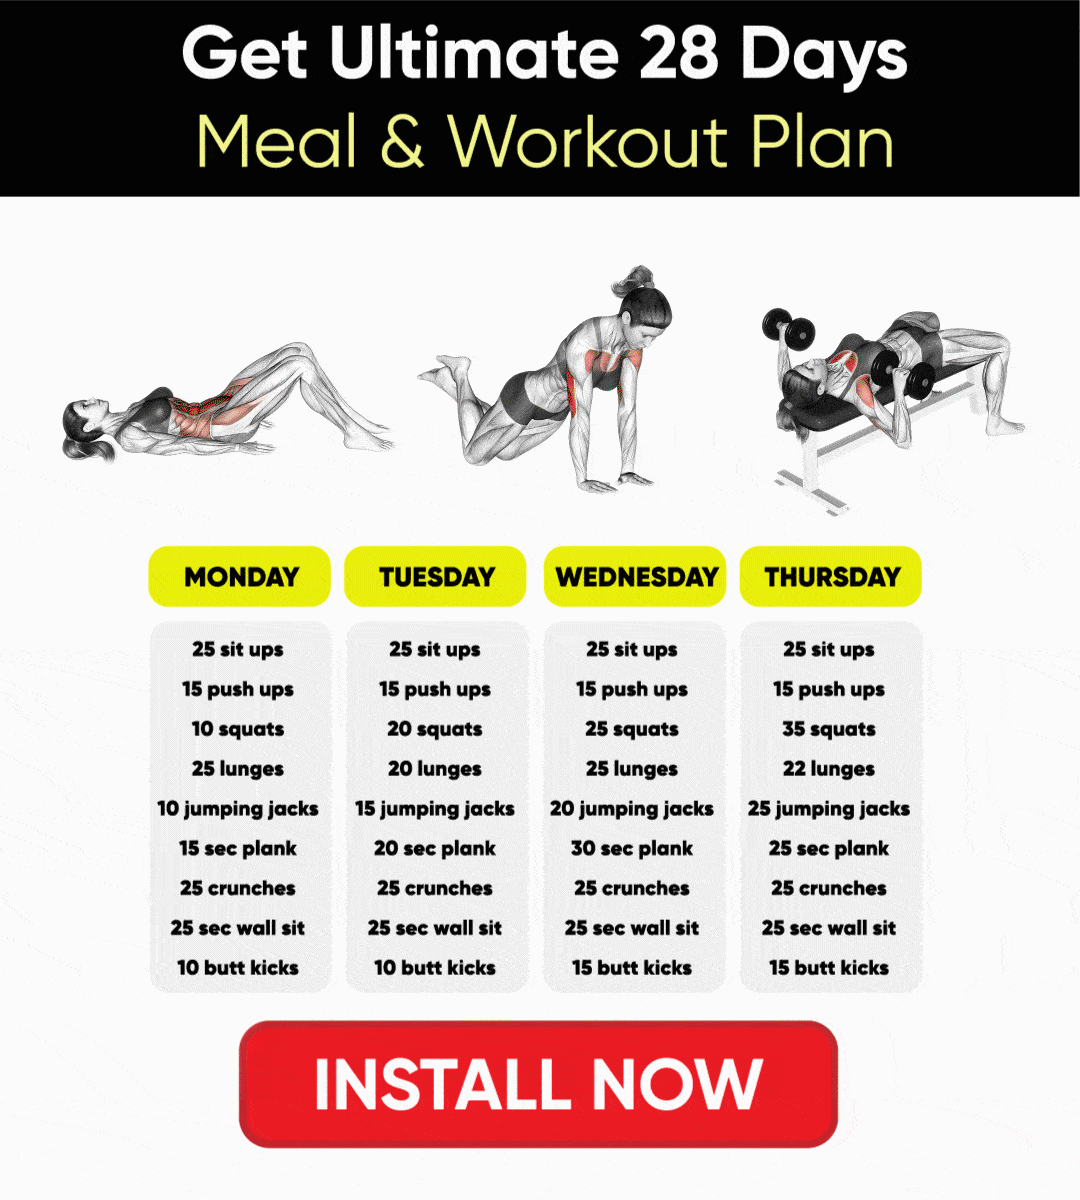 Get Ultimate 28 Days Meal & Workout Plan